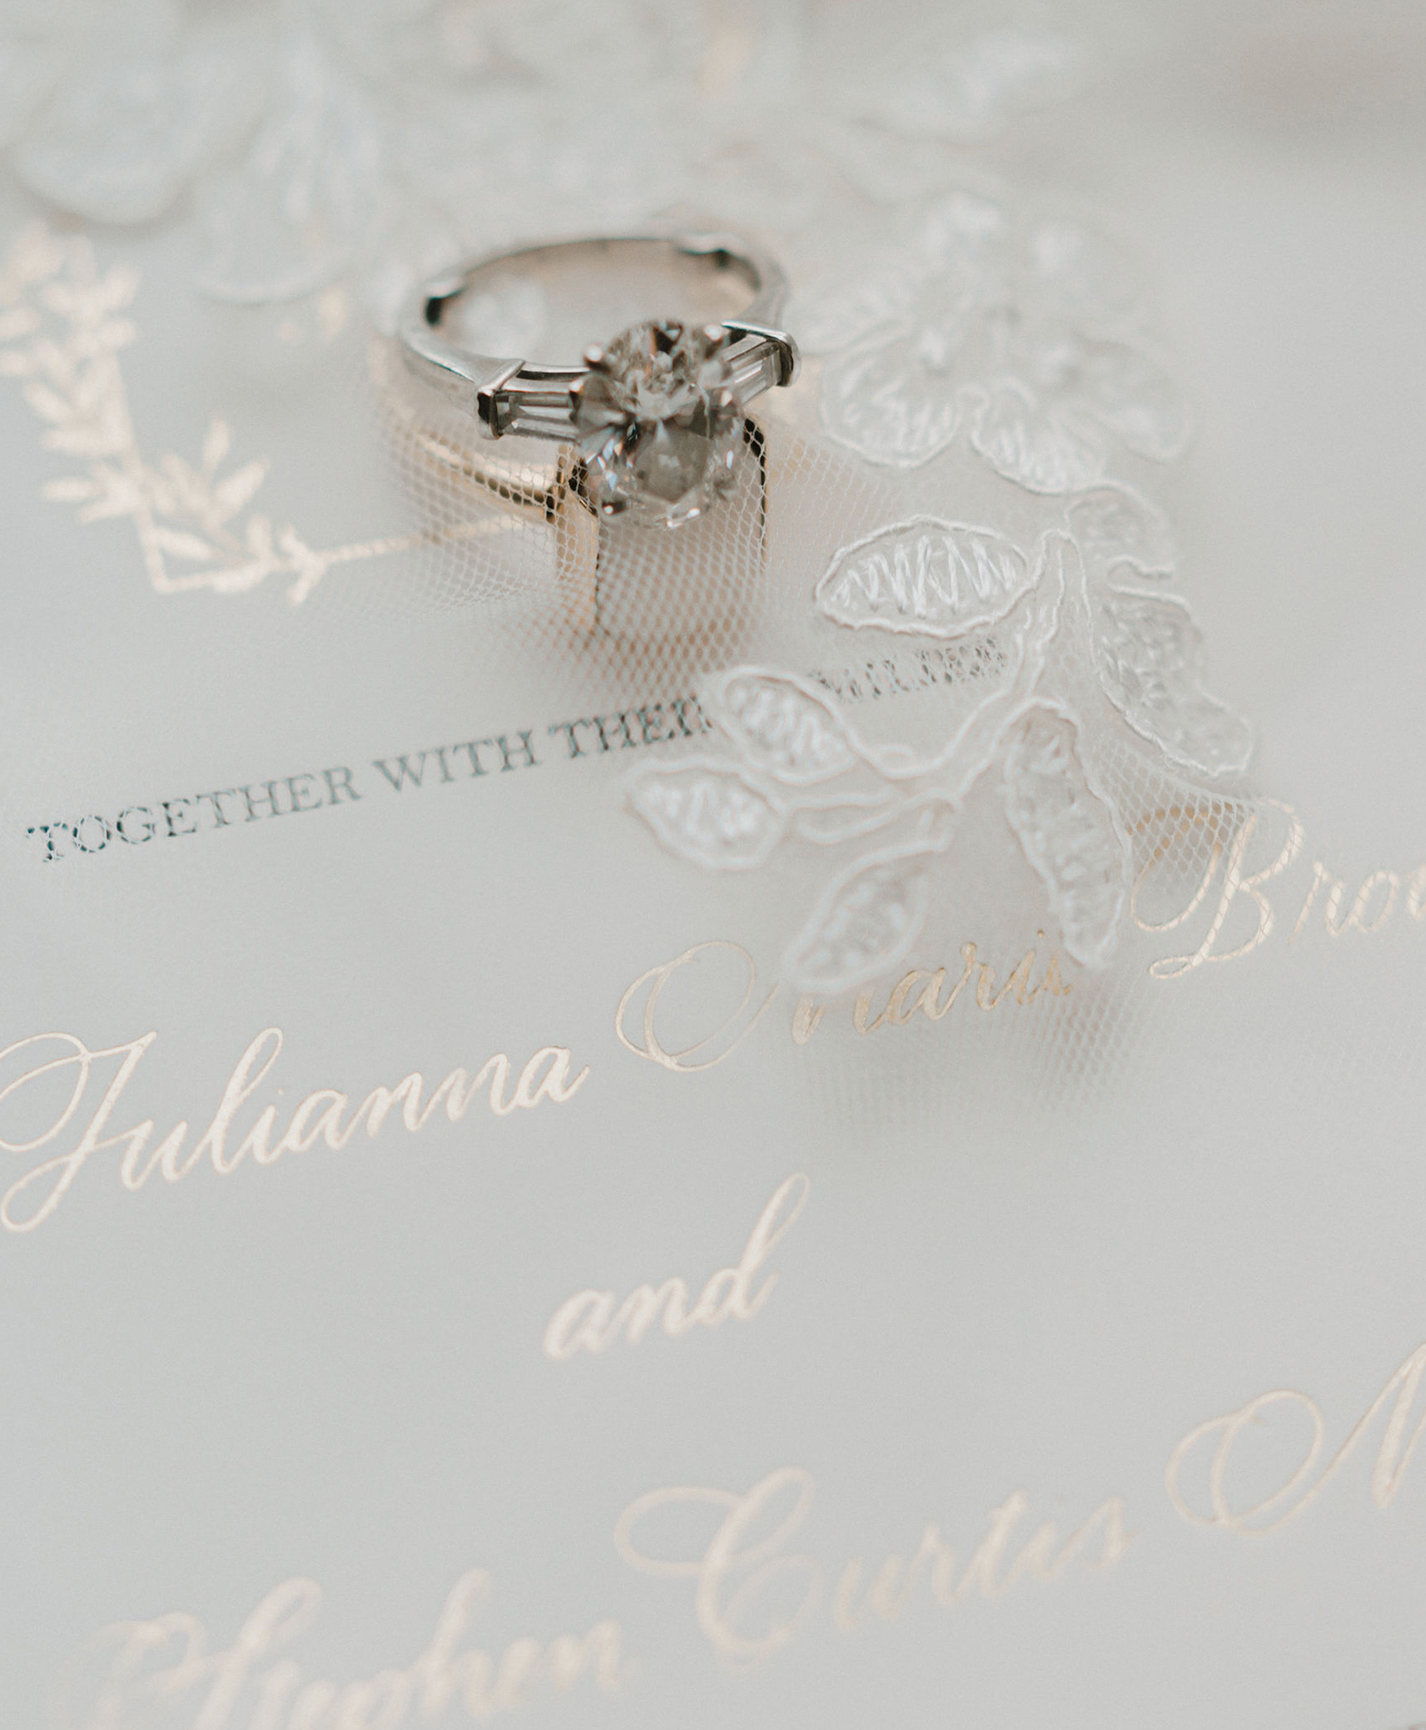 A silver engagement ring with an oval diamond sits on a wedding invitation for a wedding at The Post Oak Hotel in Houston.